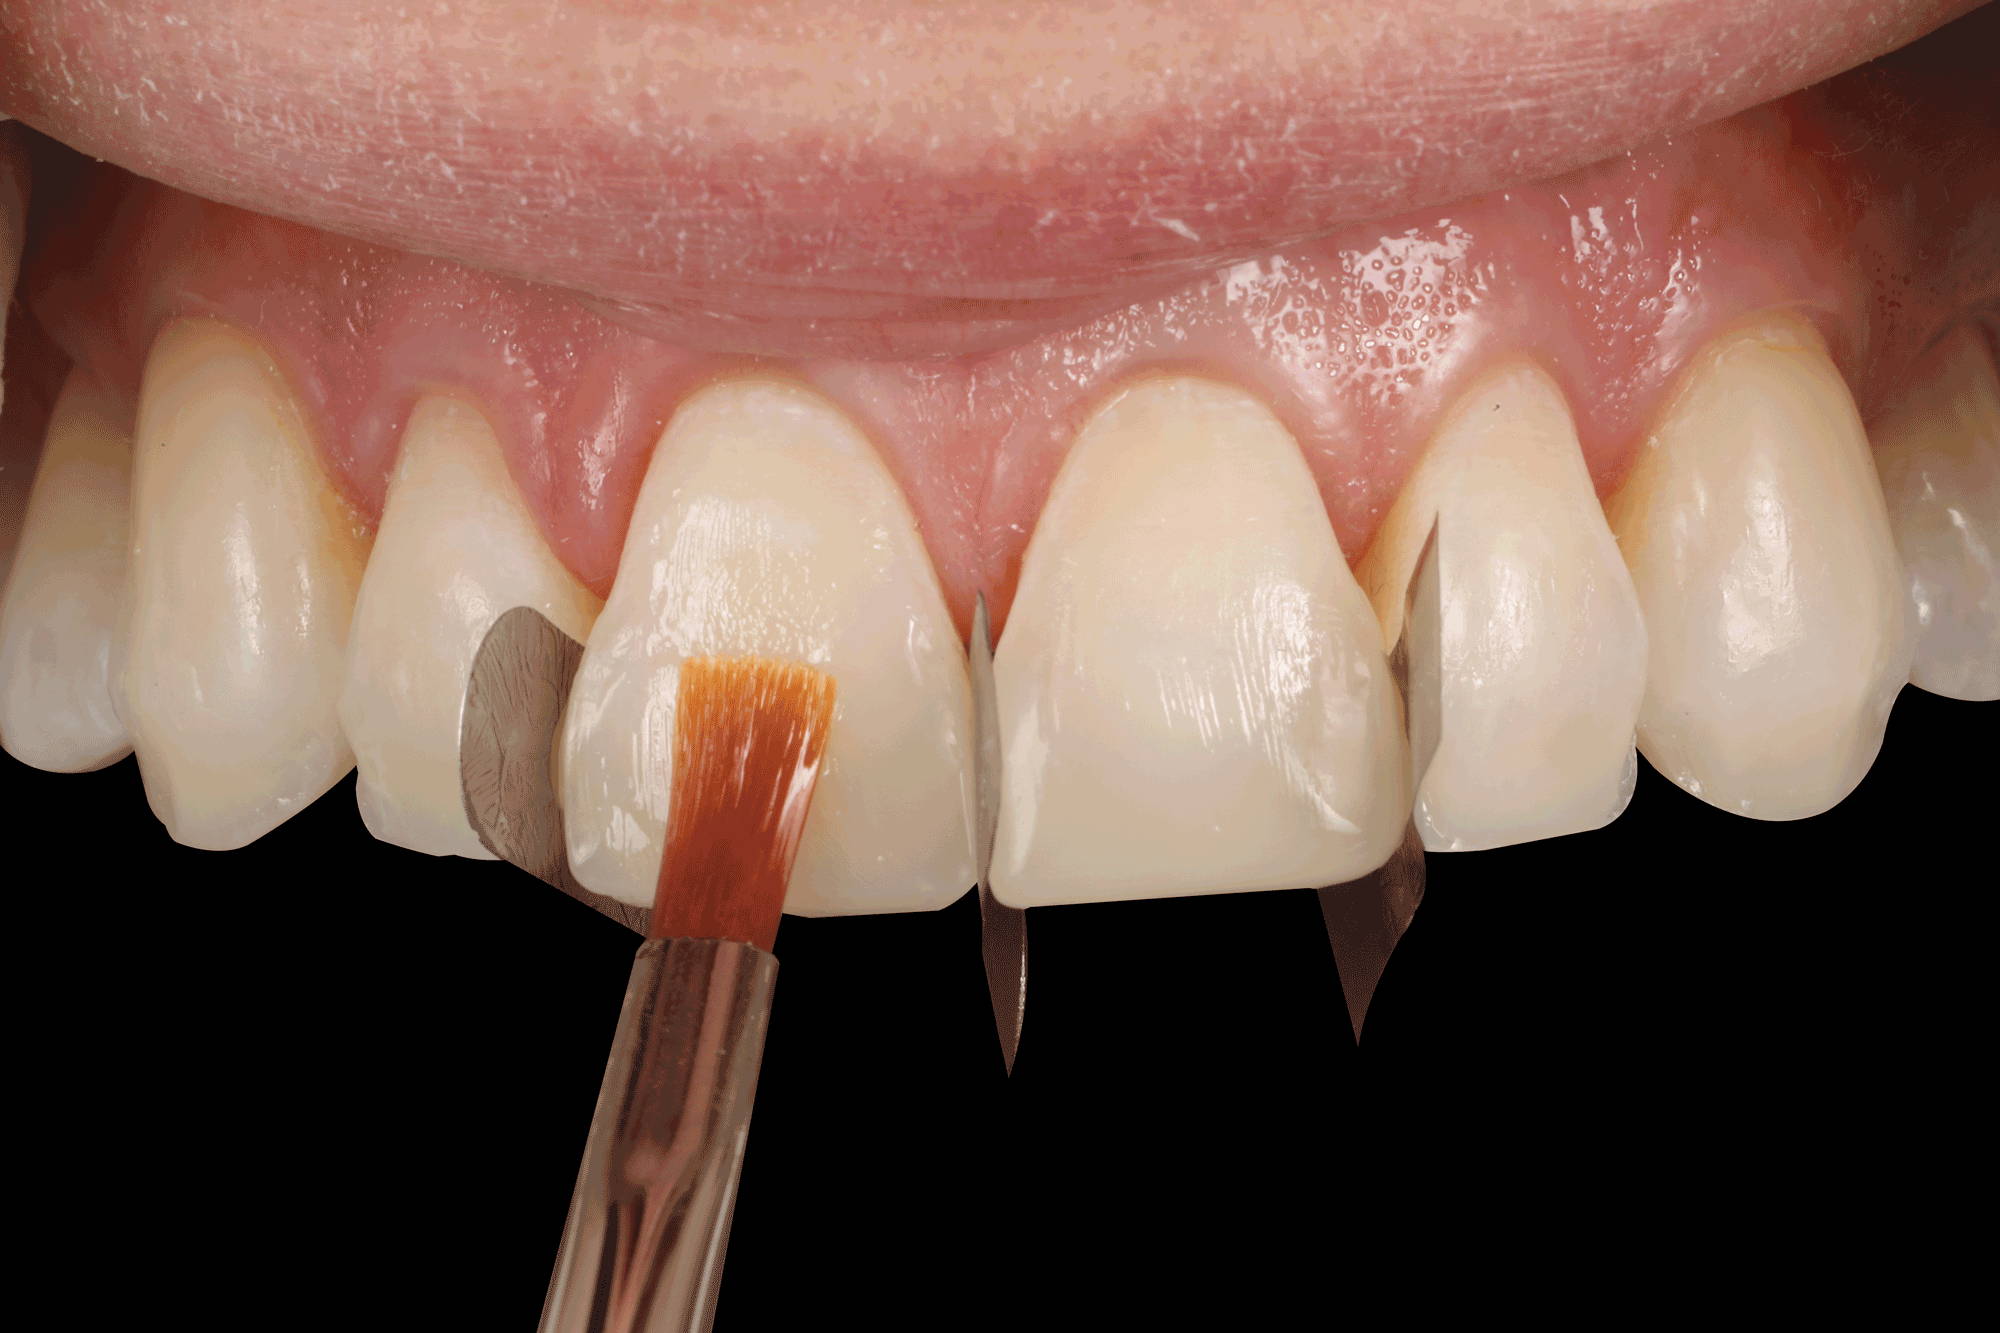 transparent material getting brushed into central incisor